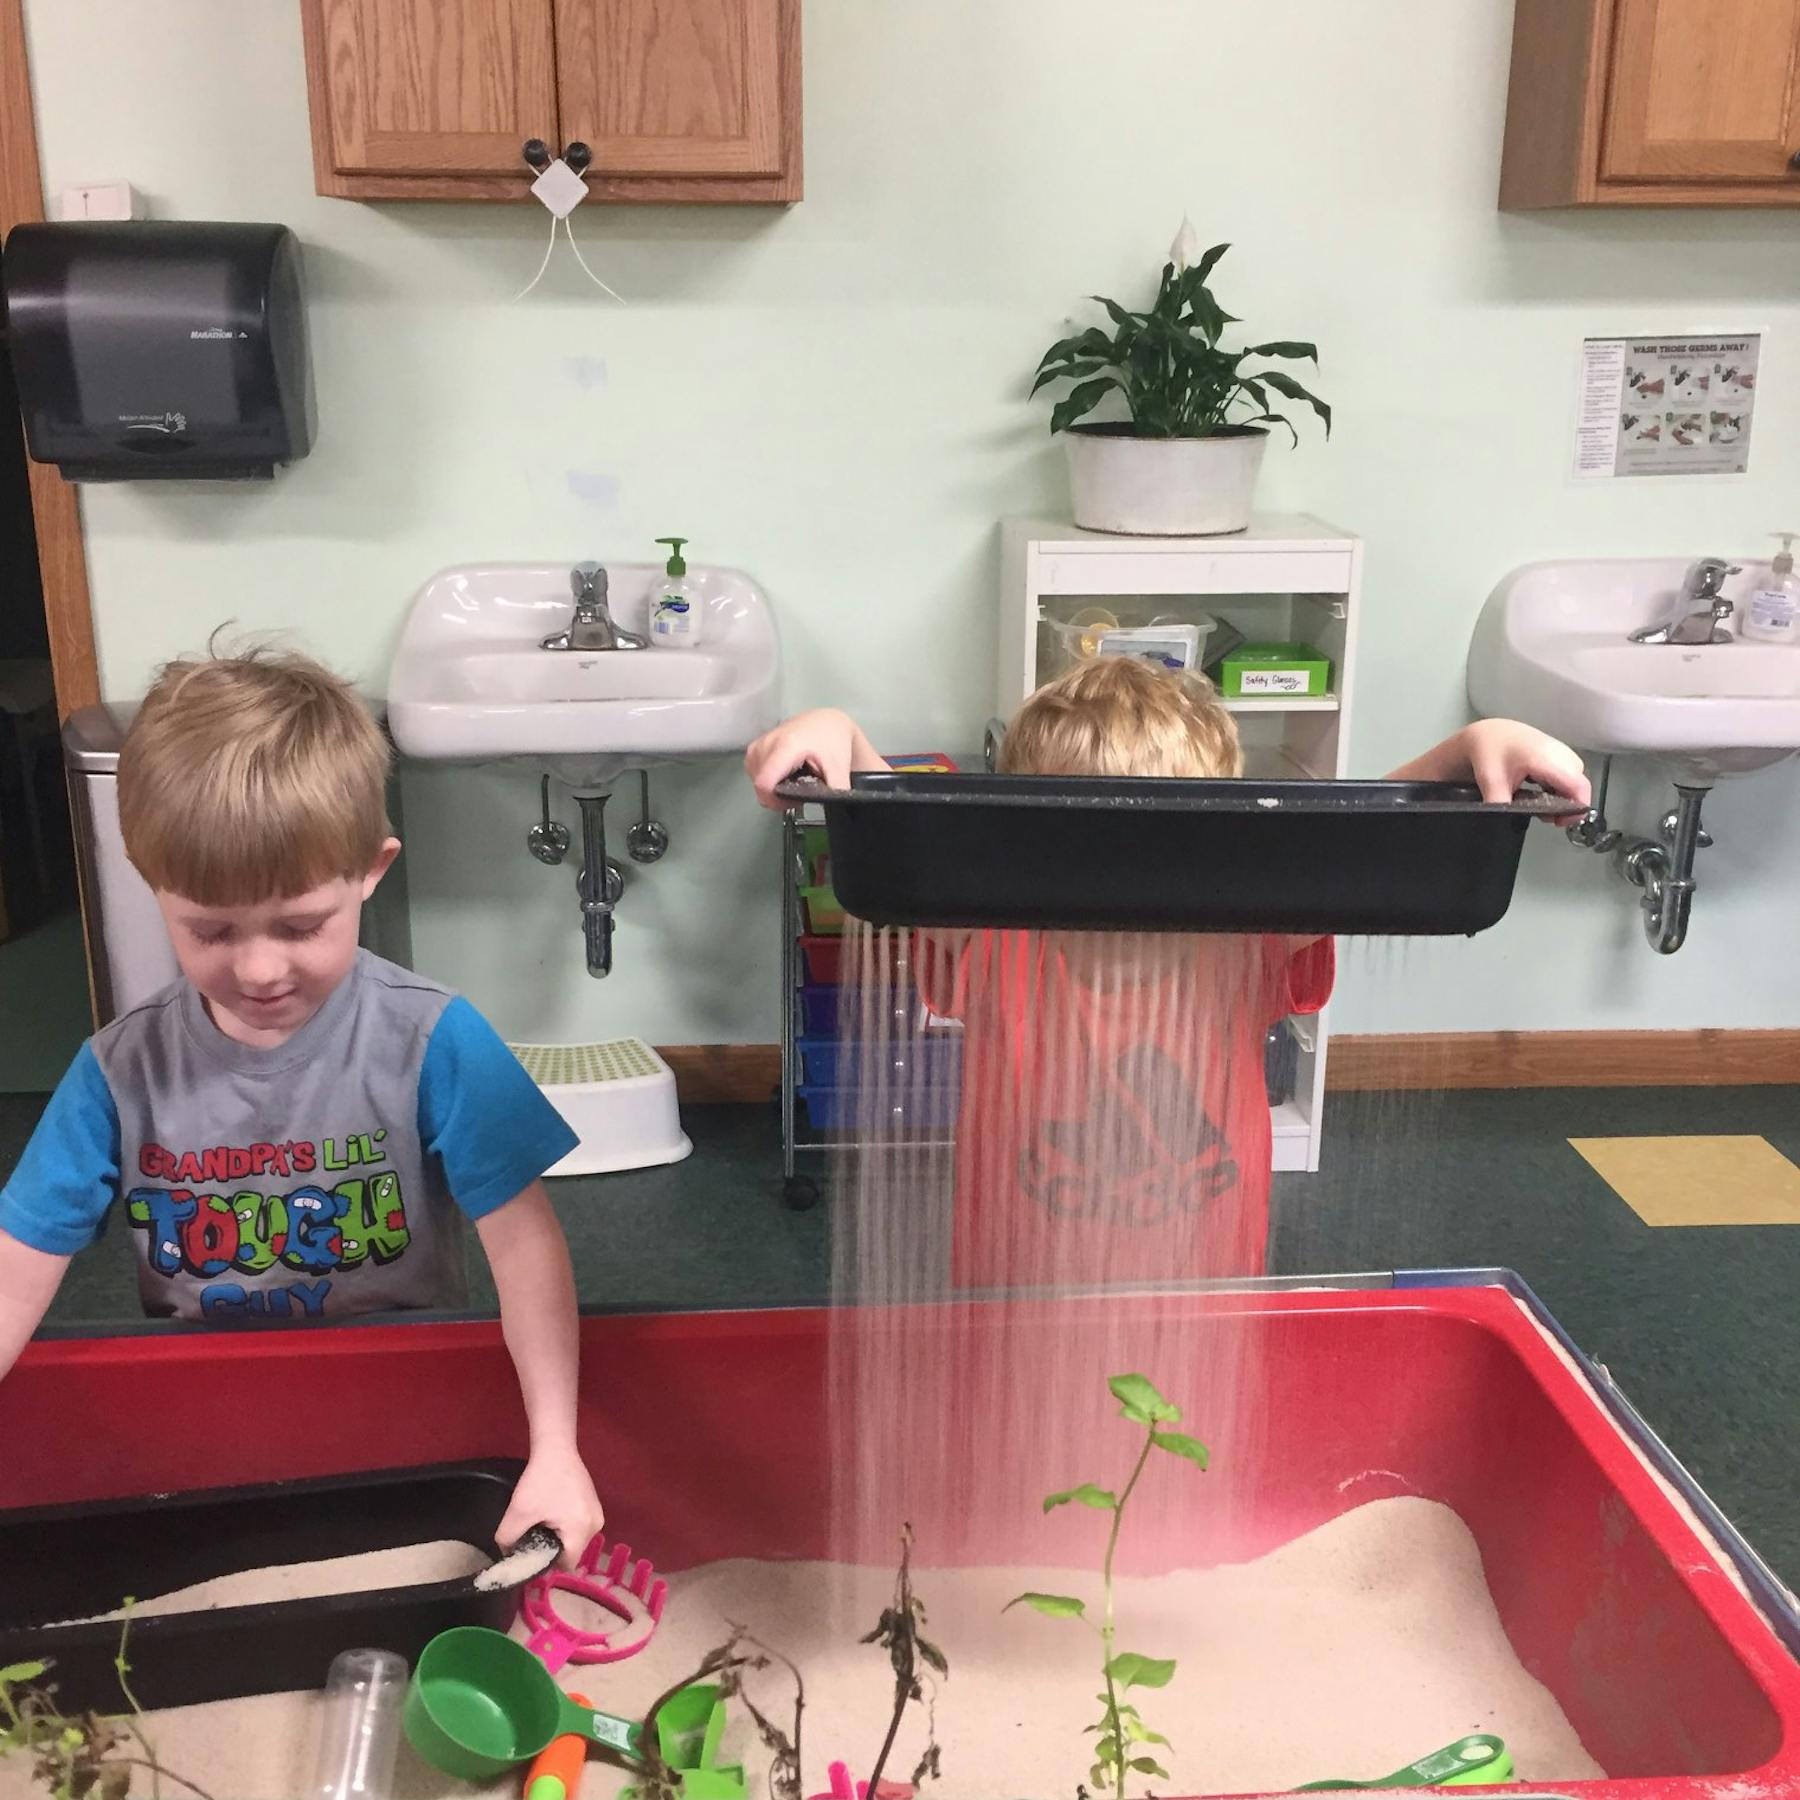 123 Look at Me Learning Center - Daycare in Eau Claire, WI ...